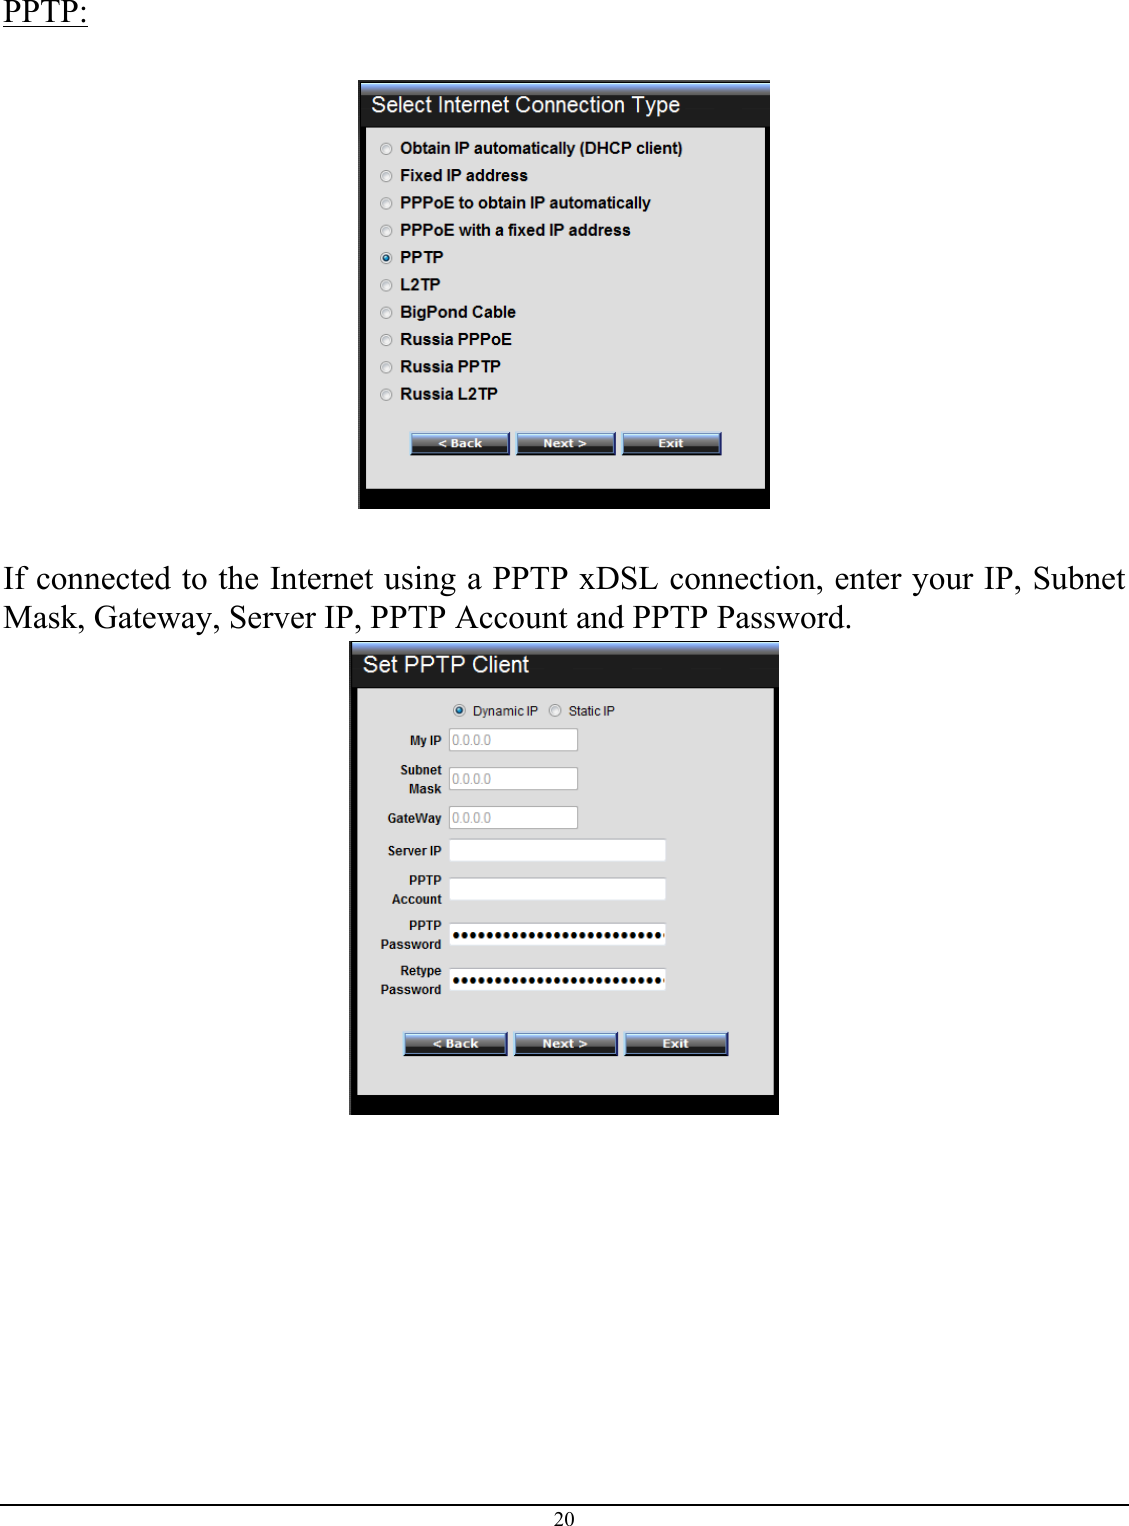 20  PPTP:    If connected to the Internet using a PPTP xDSL connection, enter your IP, Subnet Mask, Gateway, Server IP, PPTP Account and PPTP Password.    